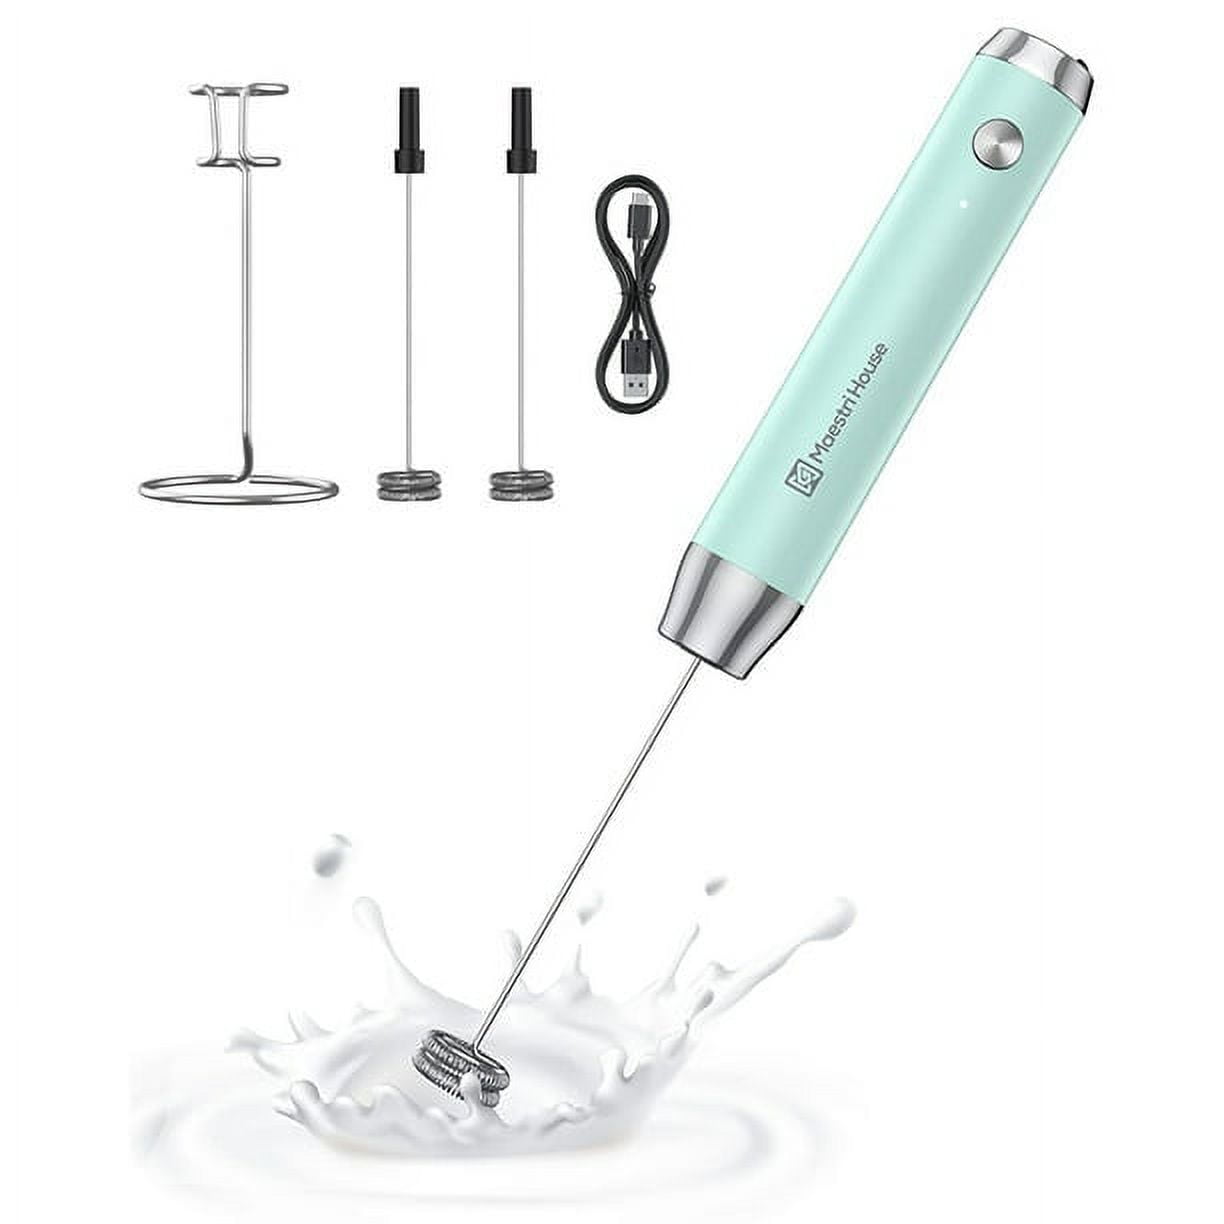 Dropship Milk Frother Handheld Rechargeable Electric Foam Maker, Drink Mixer  to Sell Online at a Lower Price